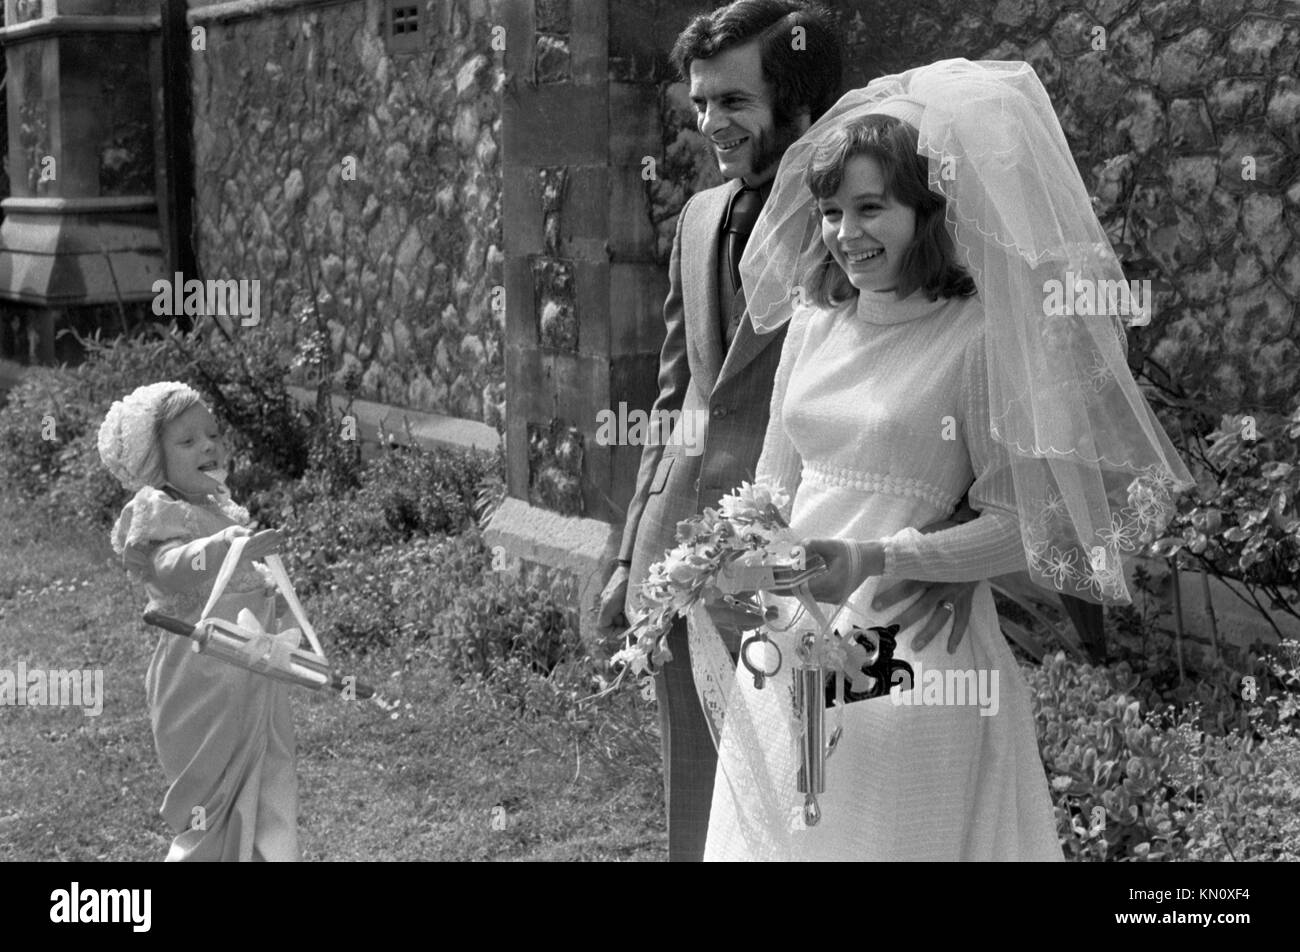 Wedding ritual a silver rolling pin for the newly married bride she carries other lucky wedding charms 1970s Uk England HOMER SYKES Stock Photo